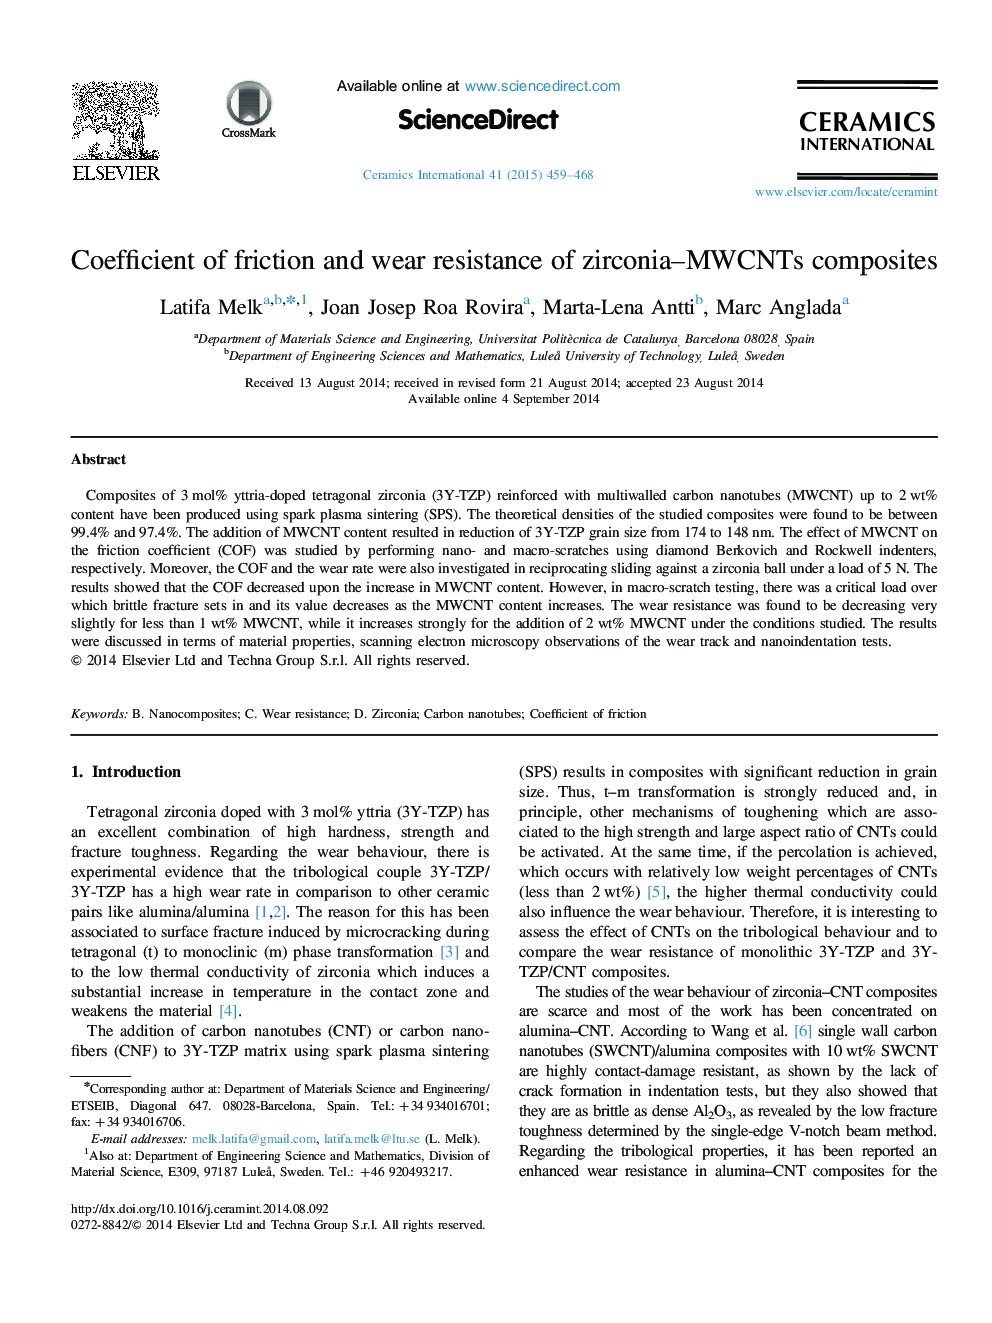 Coefficient of friction and wear resistance of zirconia–MWCNTs composites